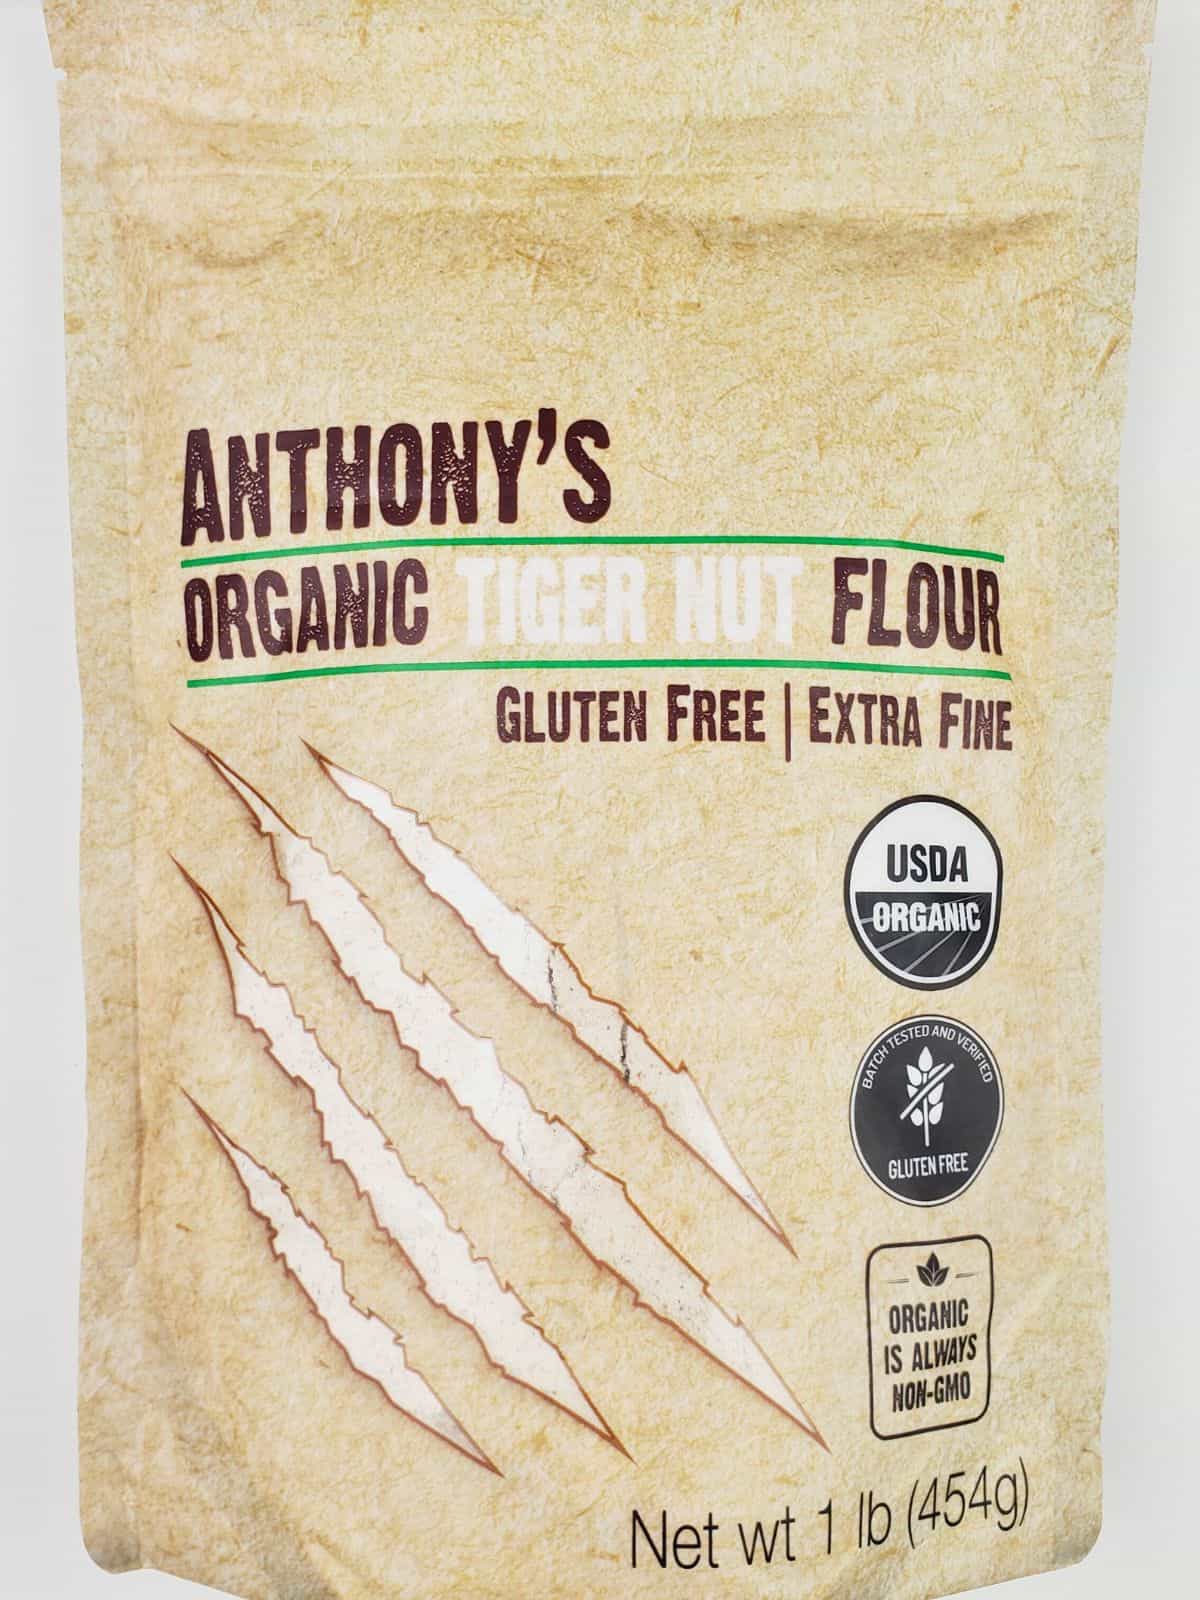 a pack of 1 LB. of tiger nut flour from Anthony's.